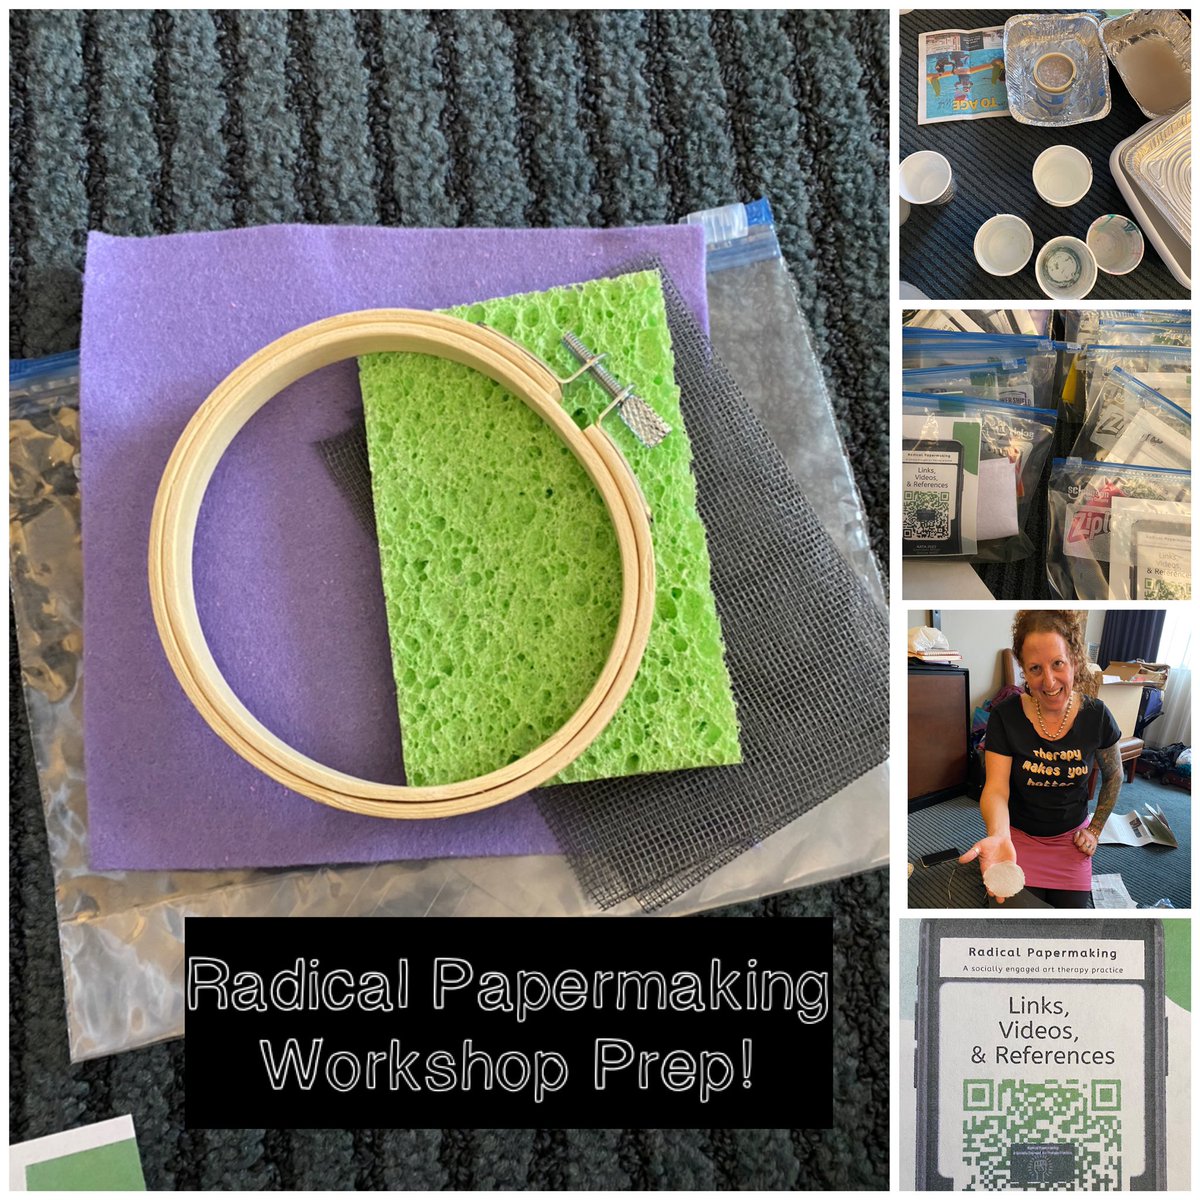 Preparing this afternoon for tomorrow’s Radical Papermaking workshop w/ Denise Wolf #aata2022 #makepapermakepeace #materialmanagement #diy #radicalpapermaking